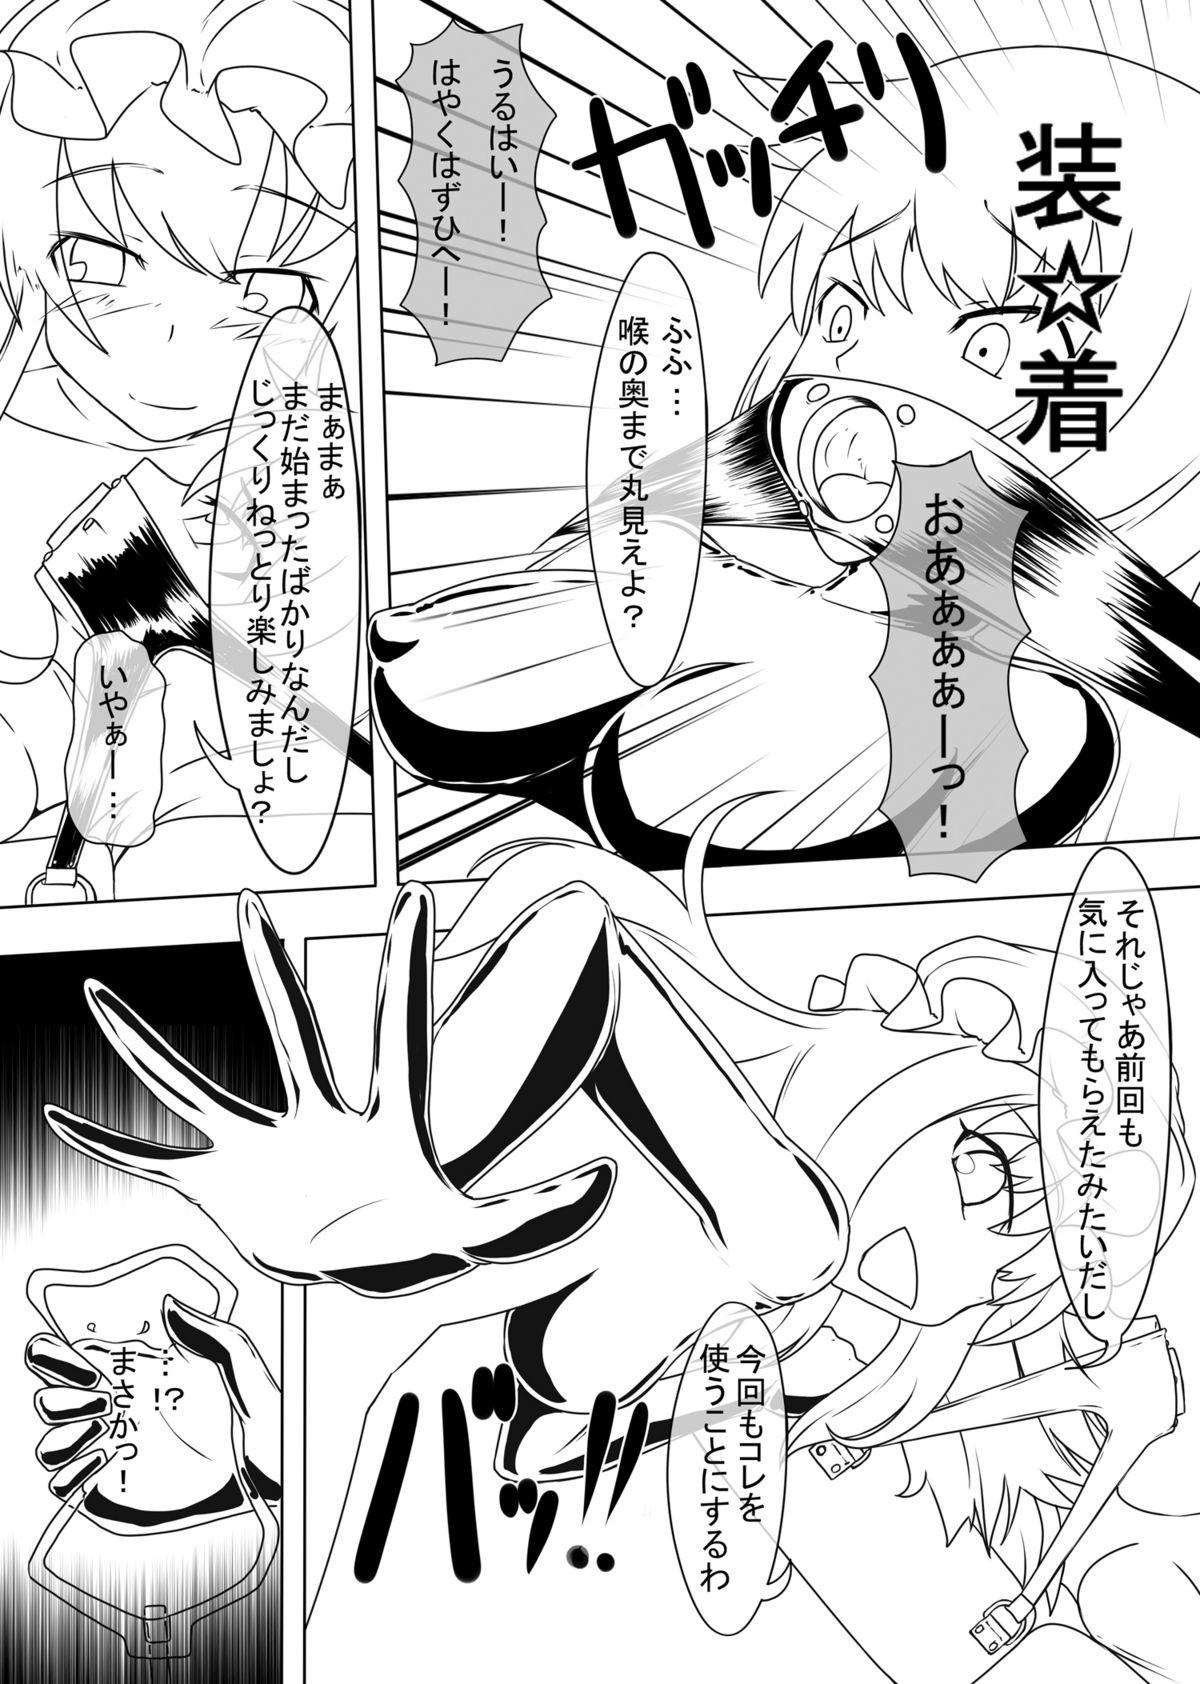 Tgirls 2nd Skin Vol.2 - Touhou project Spooning - Page 9